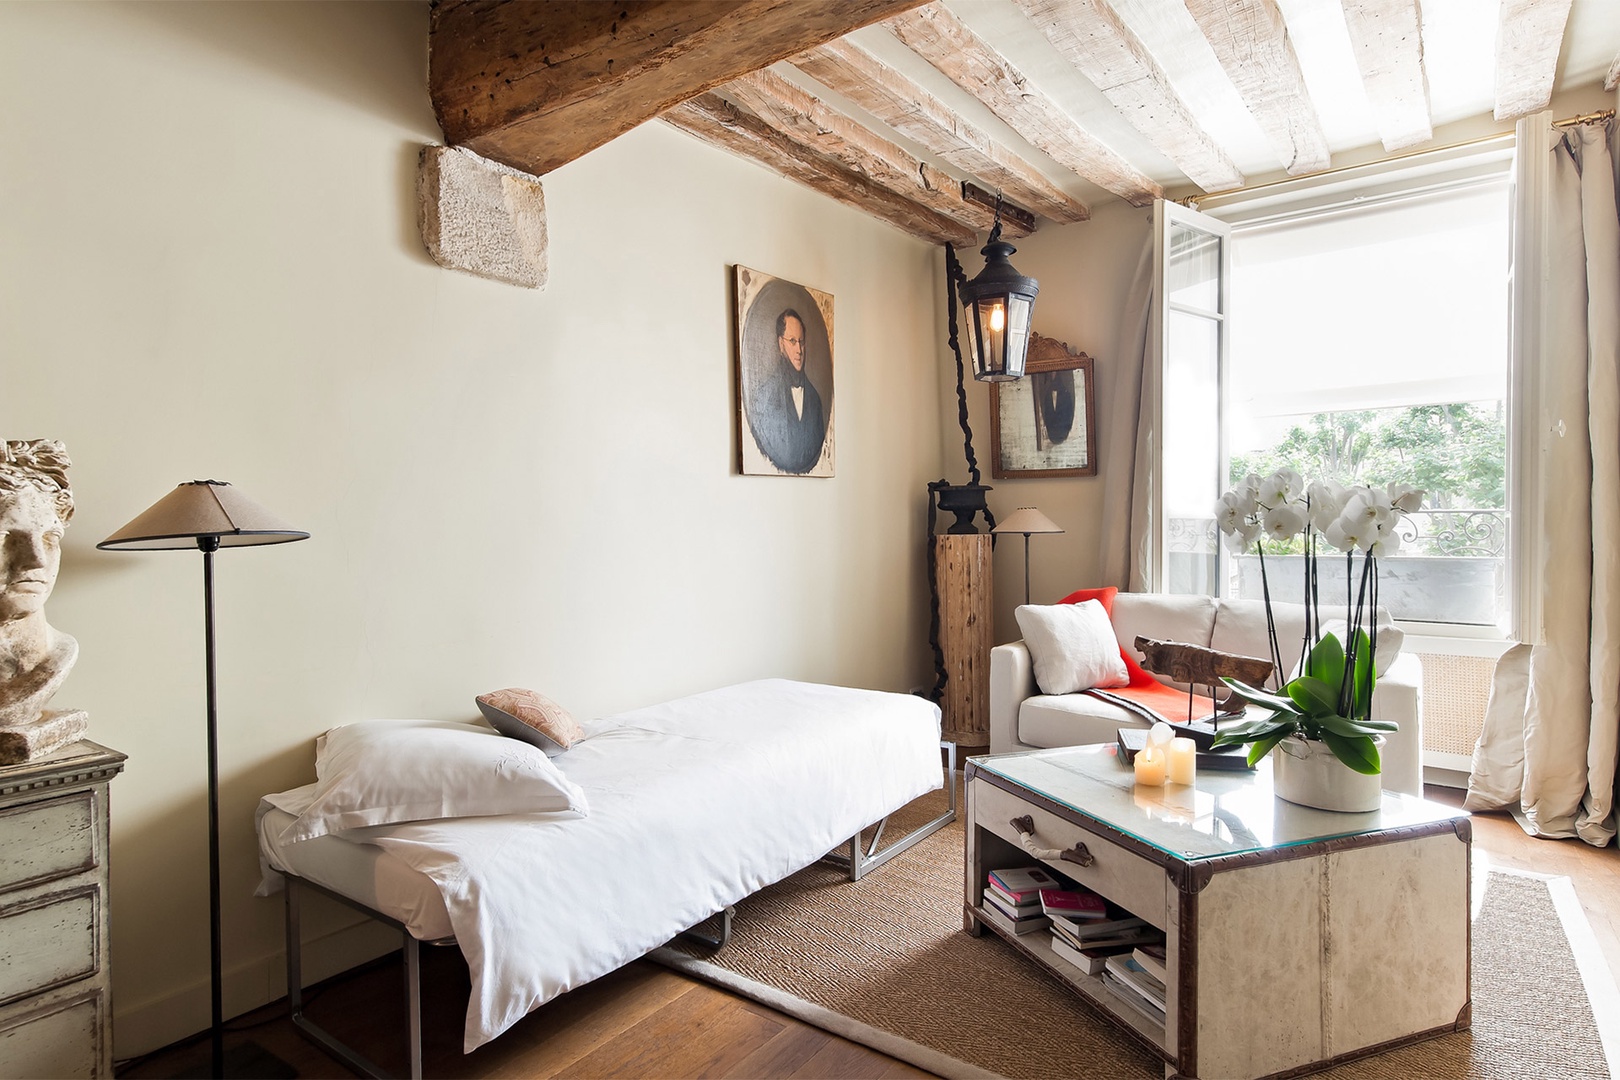 Enjoy leafy Paris views from your bed!